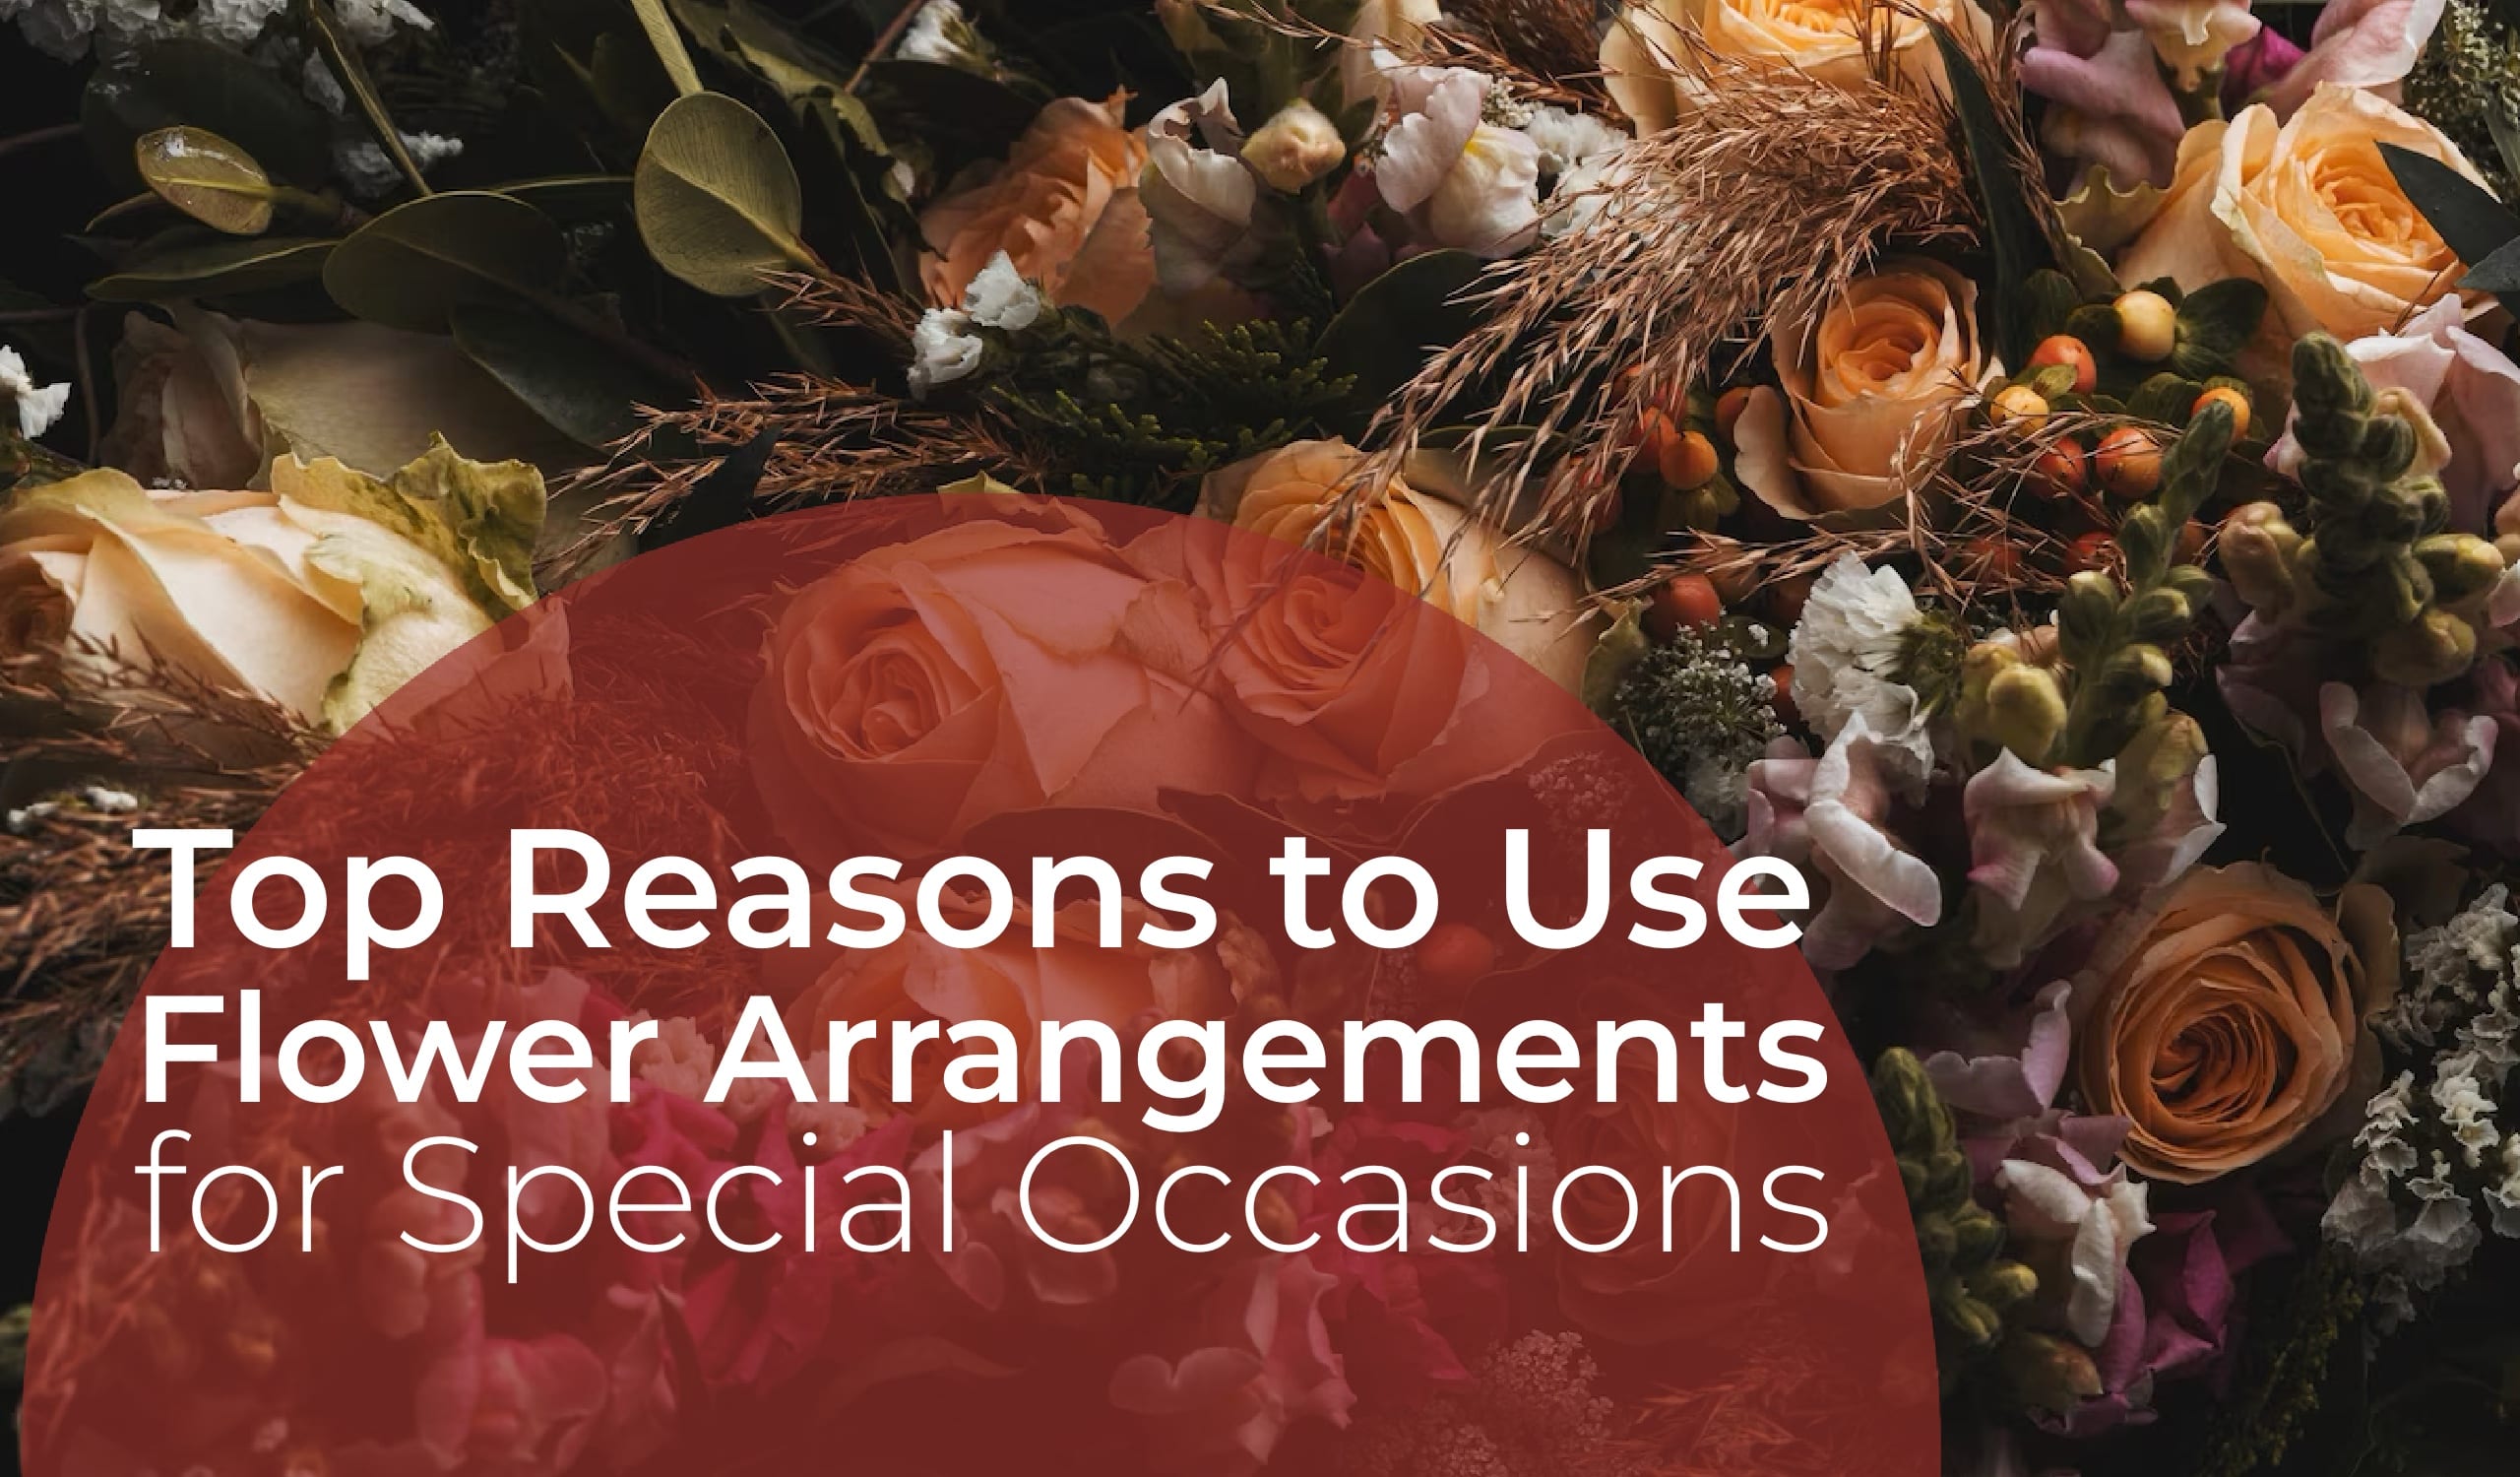 Top Reasons to Use Flower Arrangements for Special Occasions